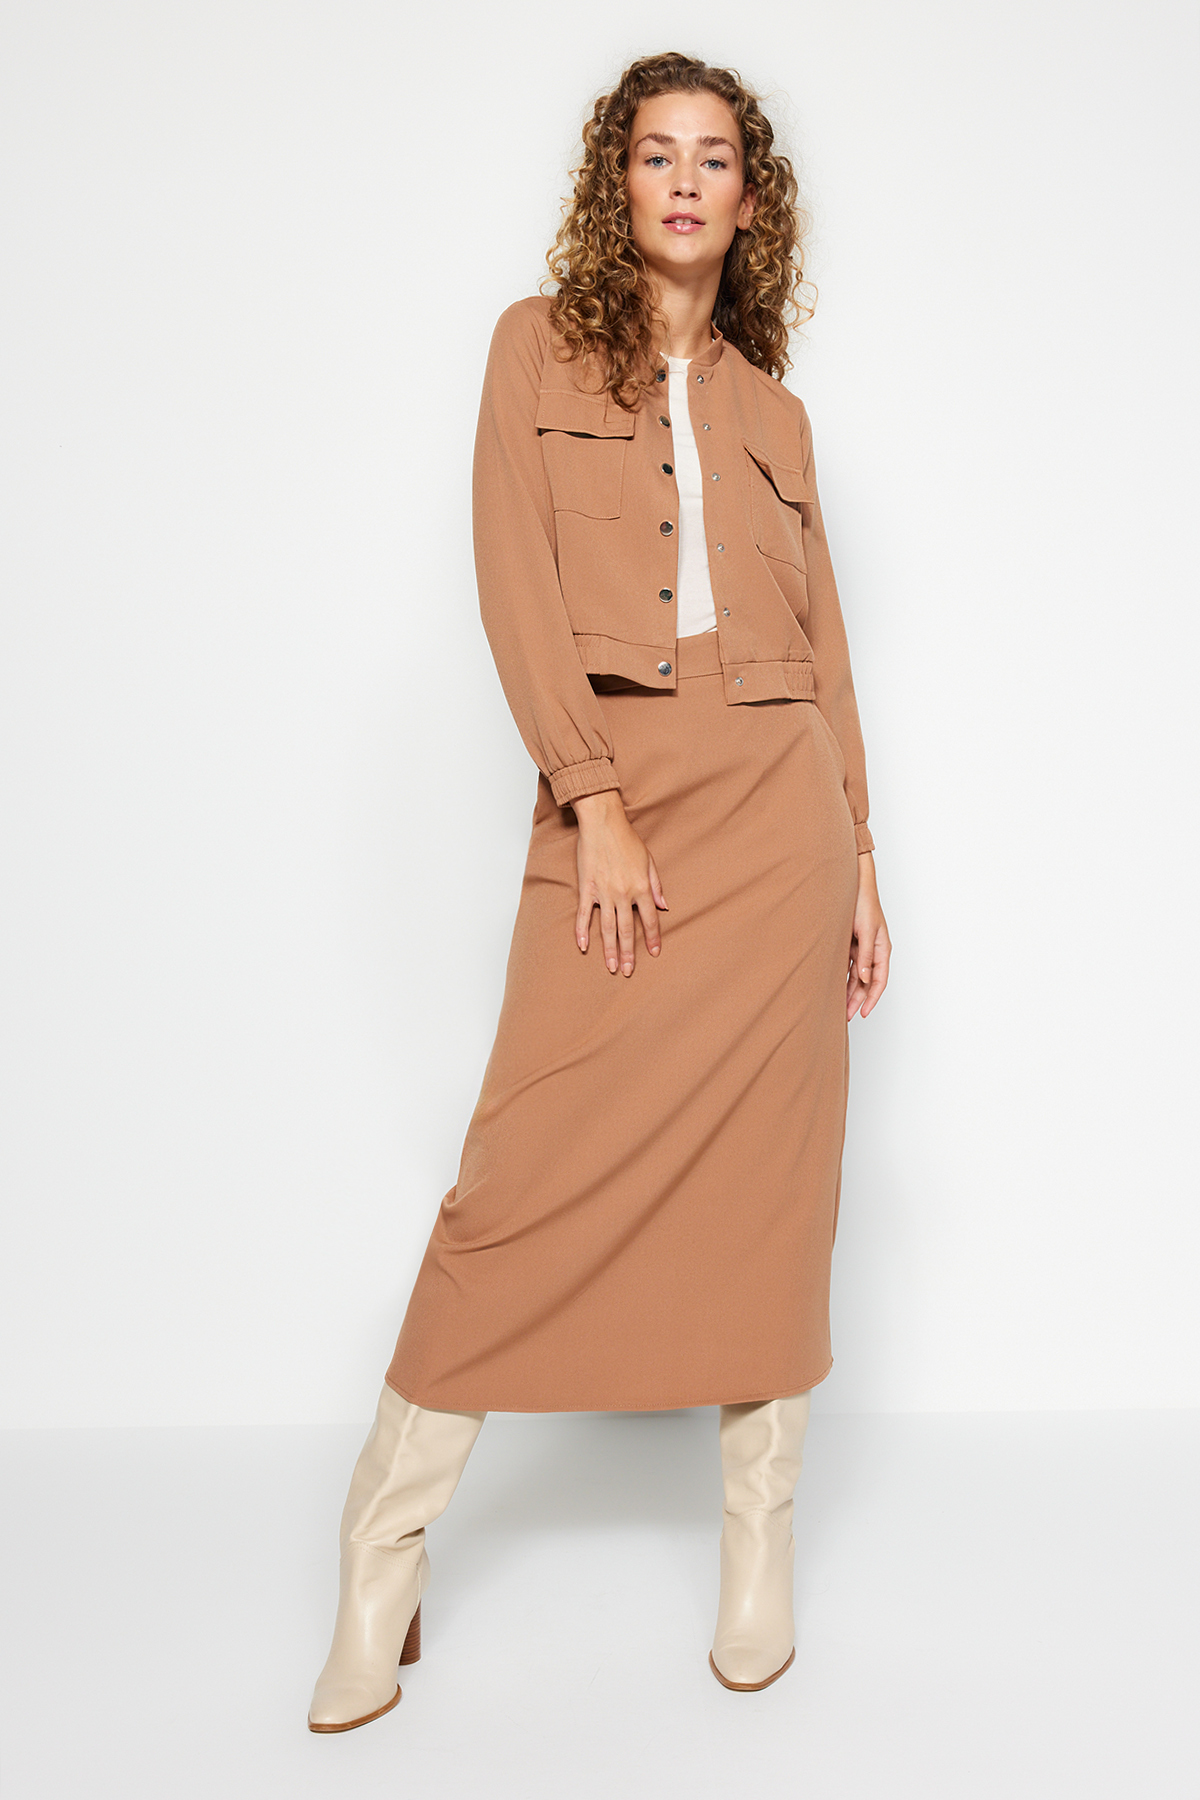 Trendyol Camel Jacket-Skirt With Pockets, Woven Fabric Bottom-Top Suit